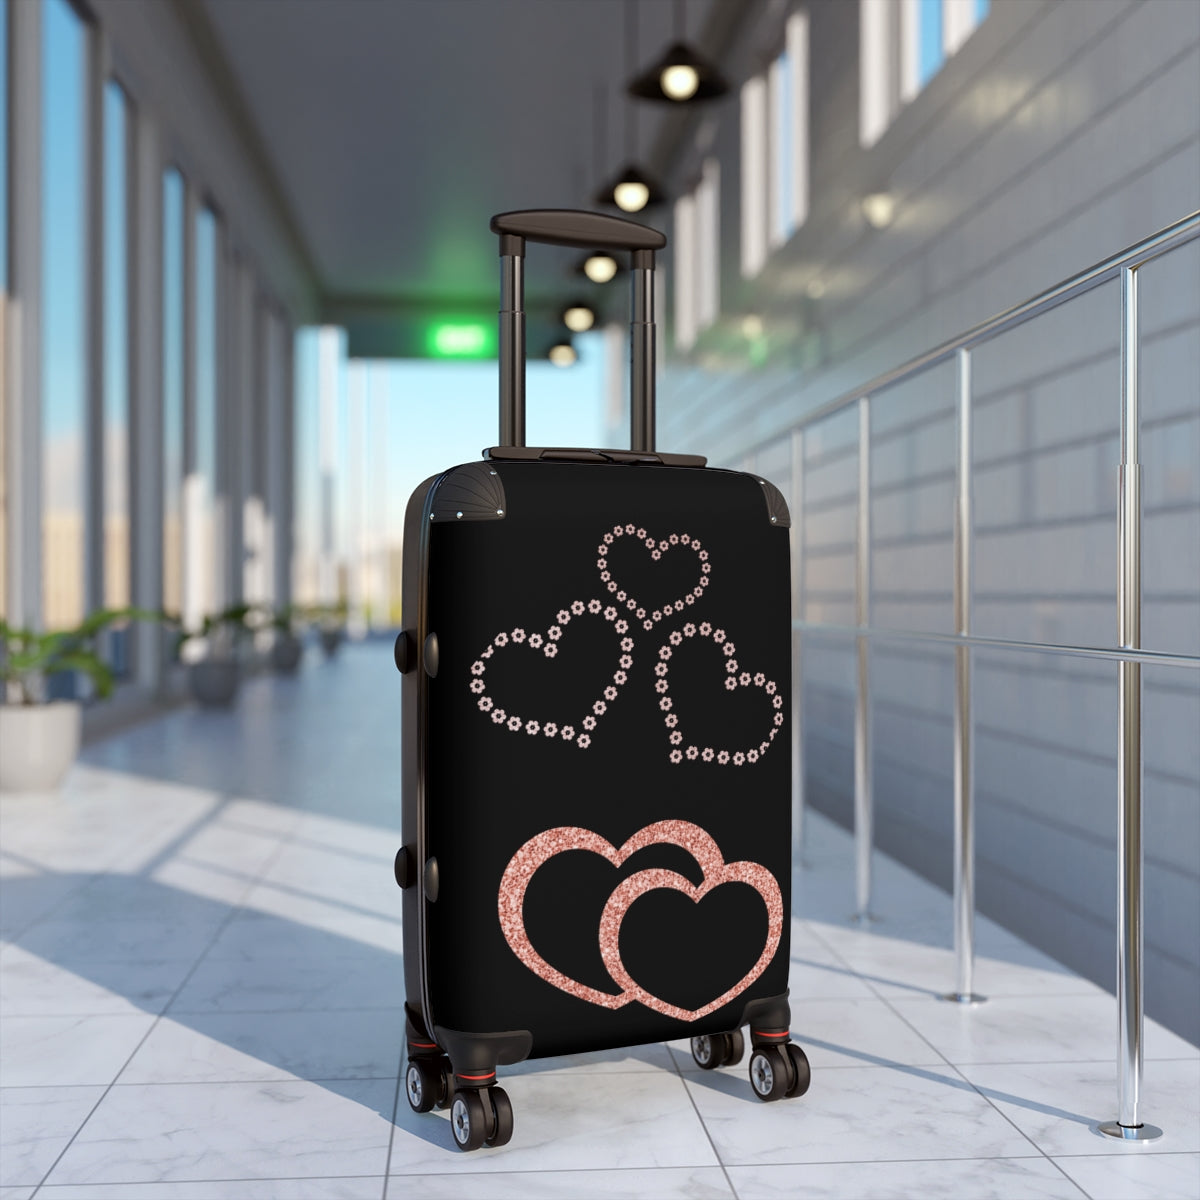 LUGGAGE WITH WHEELS, HEARTS ART SPARKLE SUITCASE SET BY ARTZIRA, VALENTINE DAY GIFT, HONEYMOON TRAVEL LUGGAGEs Double Wheeled Spinners, Women's Choice